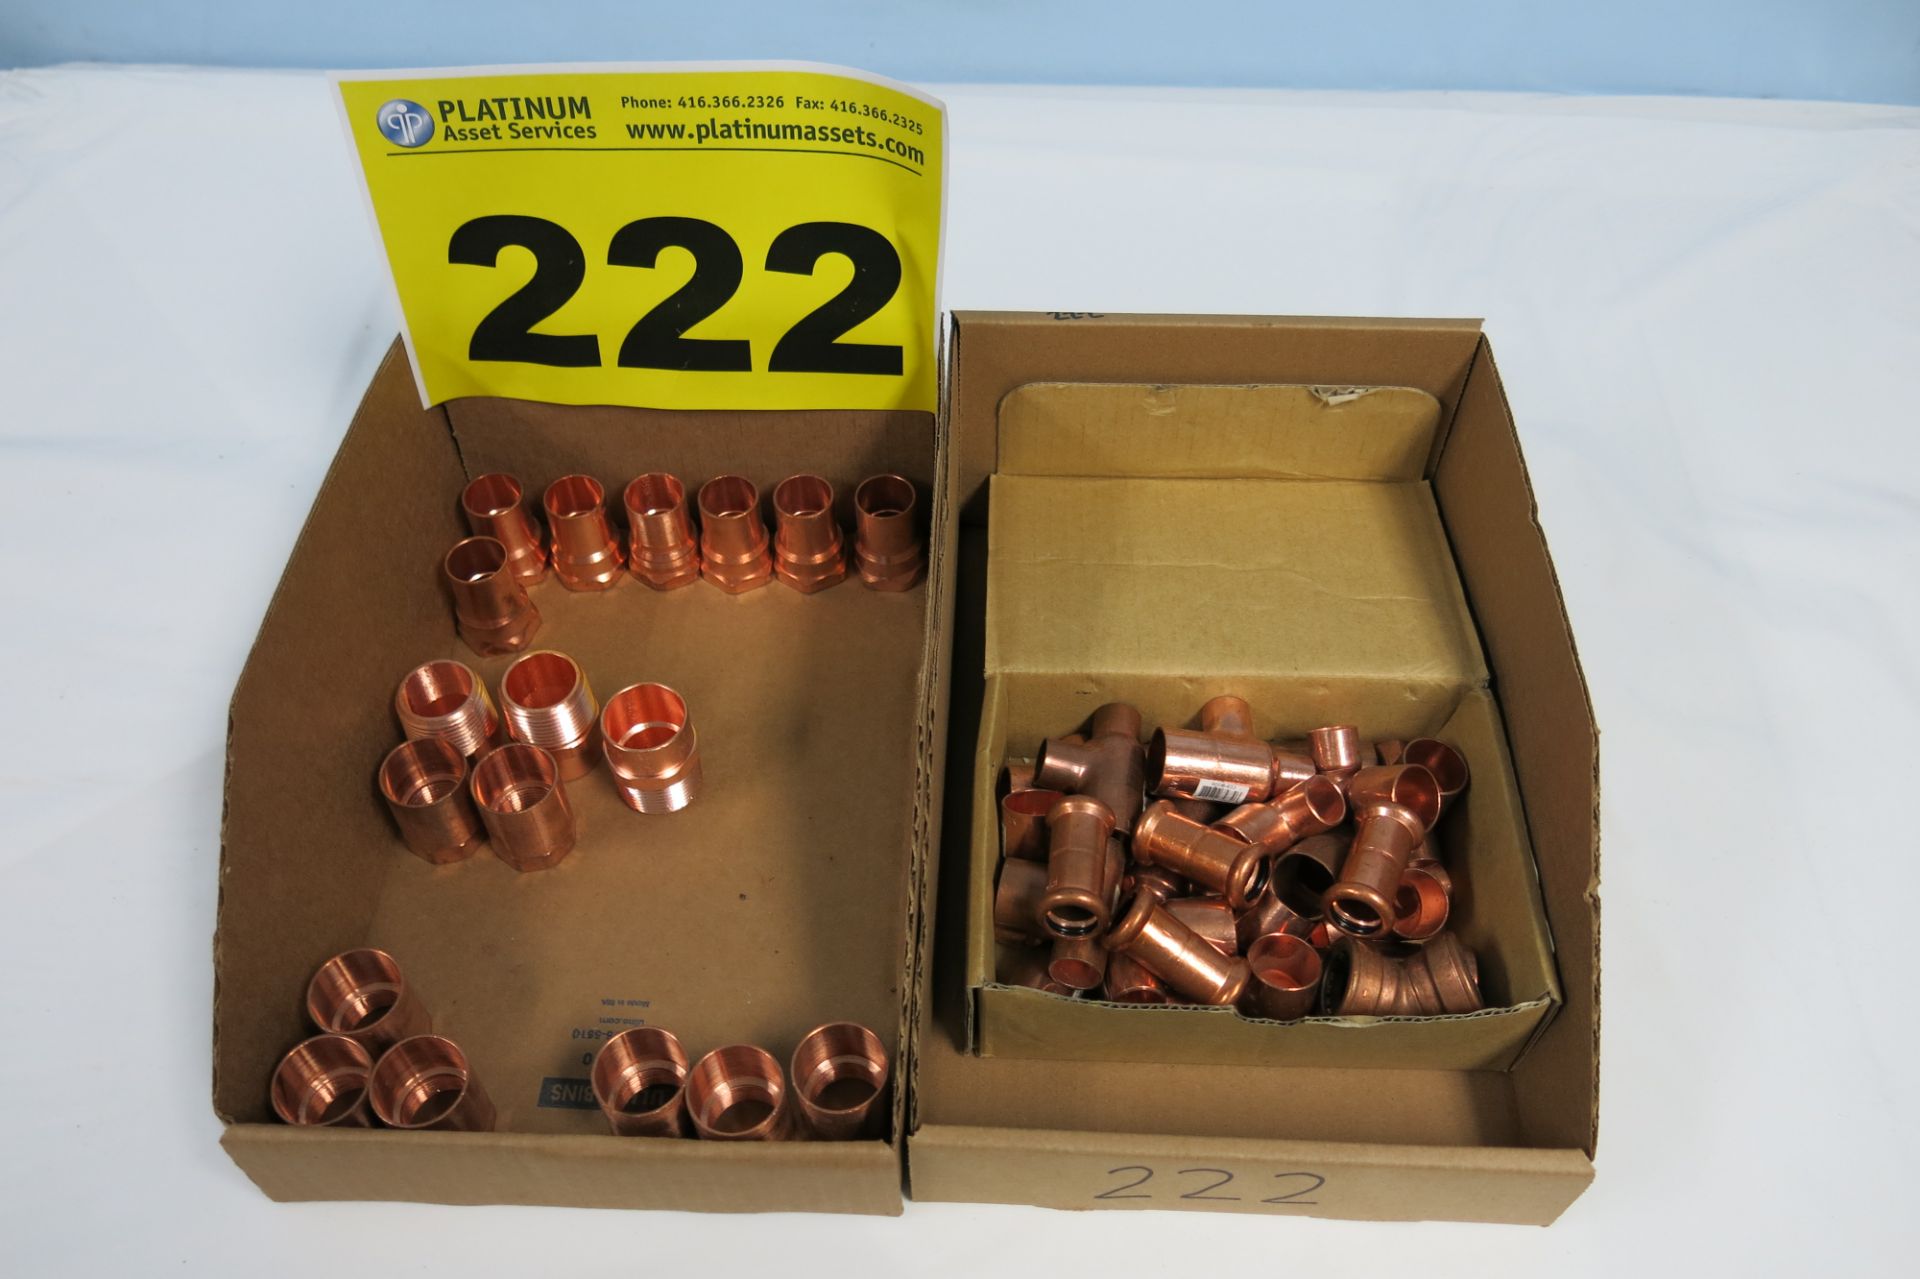 LOT OF ASSORTED COPPER PIPE CONNECTORS - NEW (LOCATED IN MISSISSAUGA)